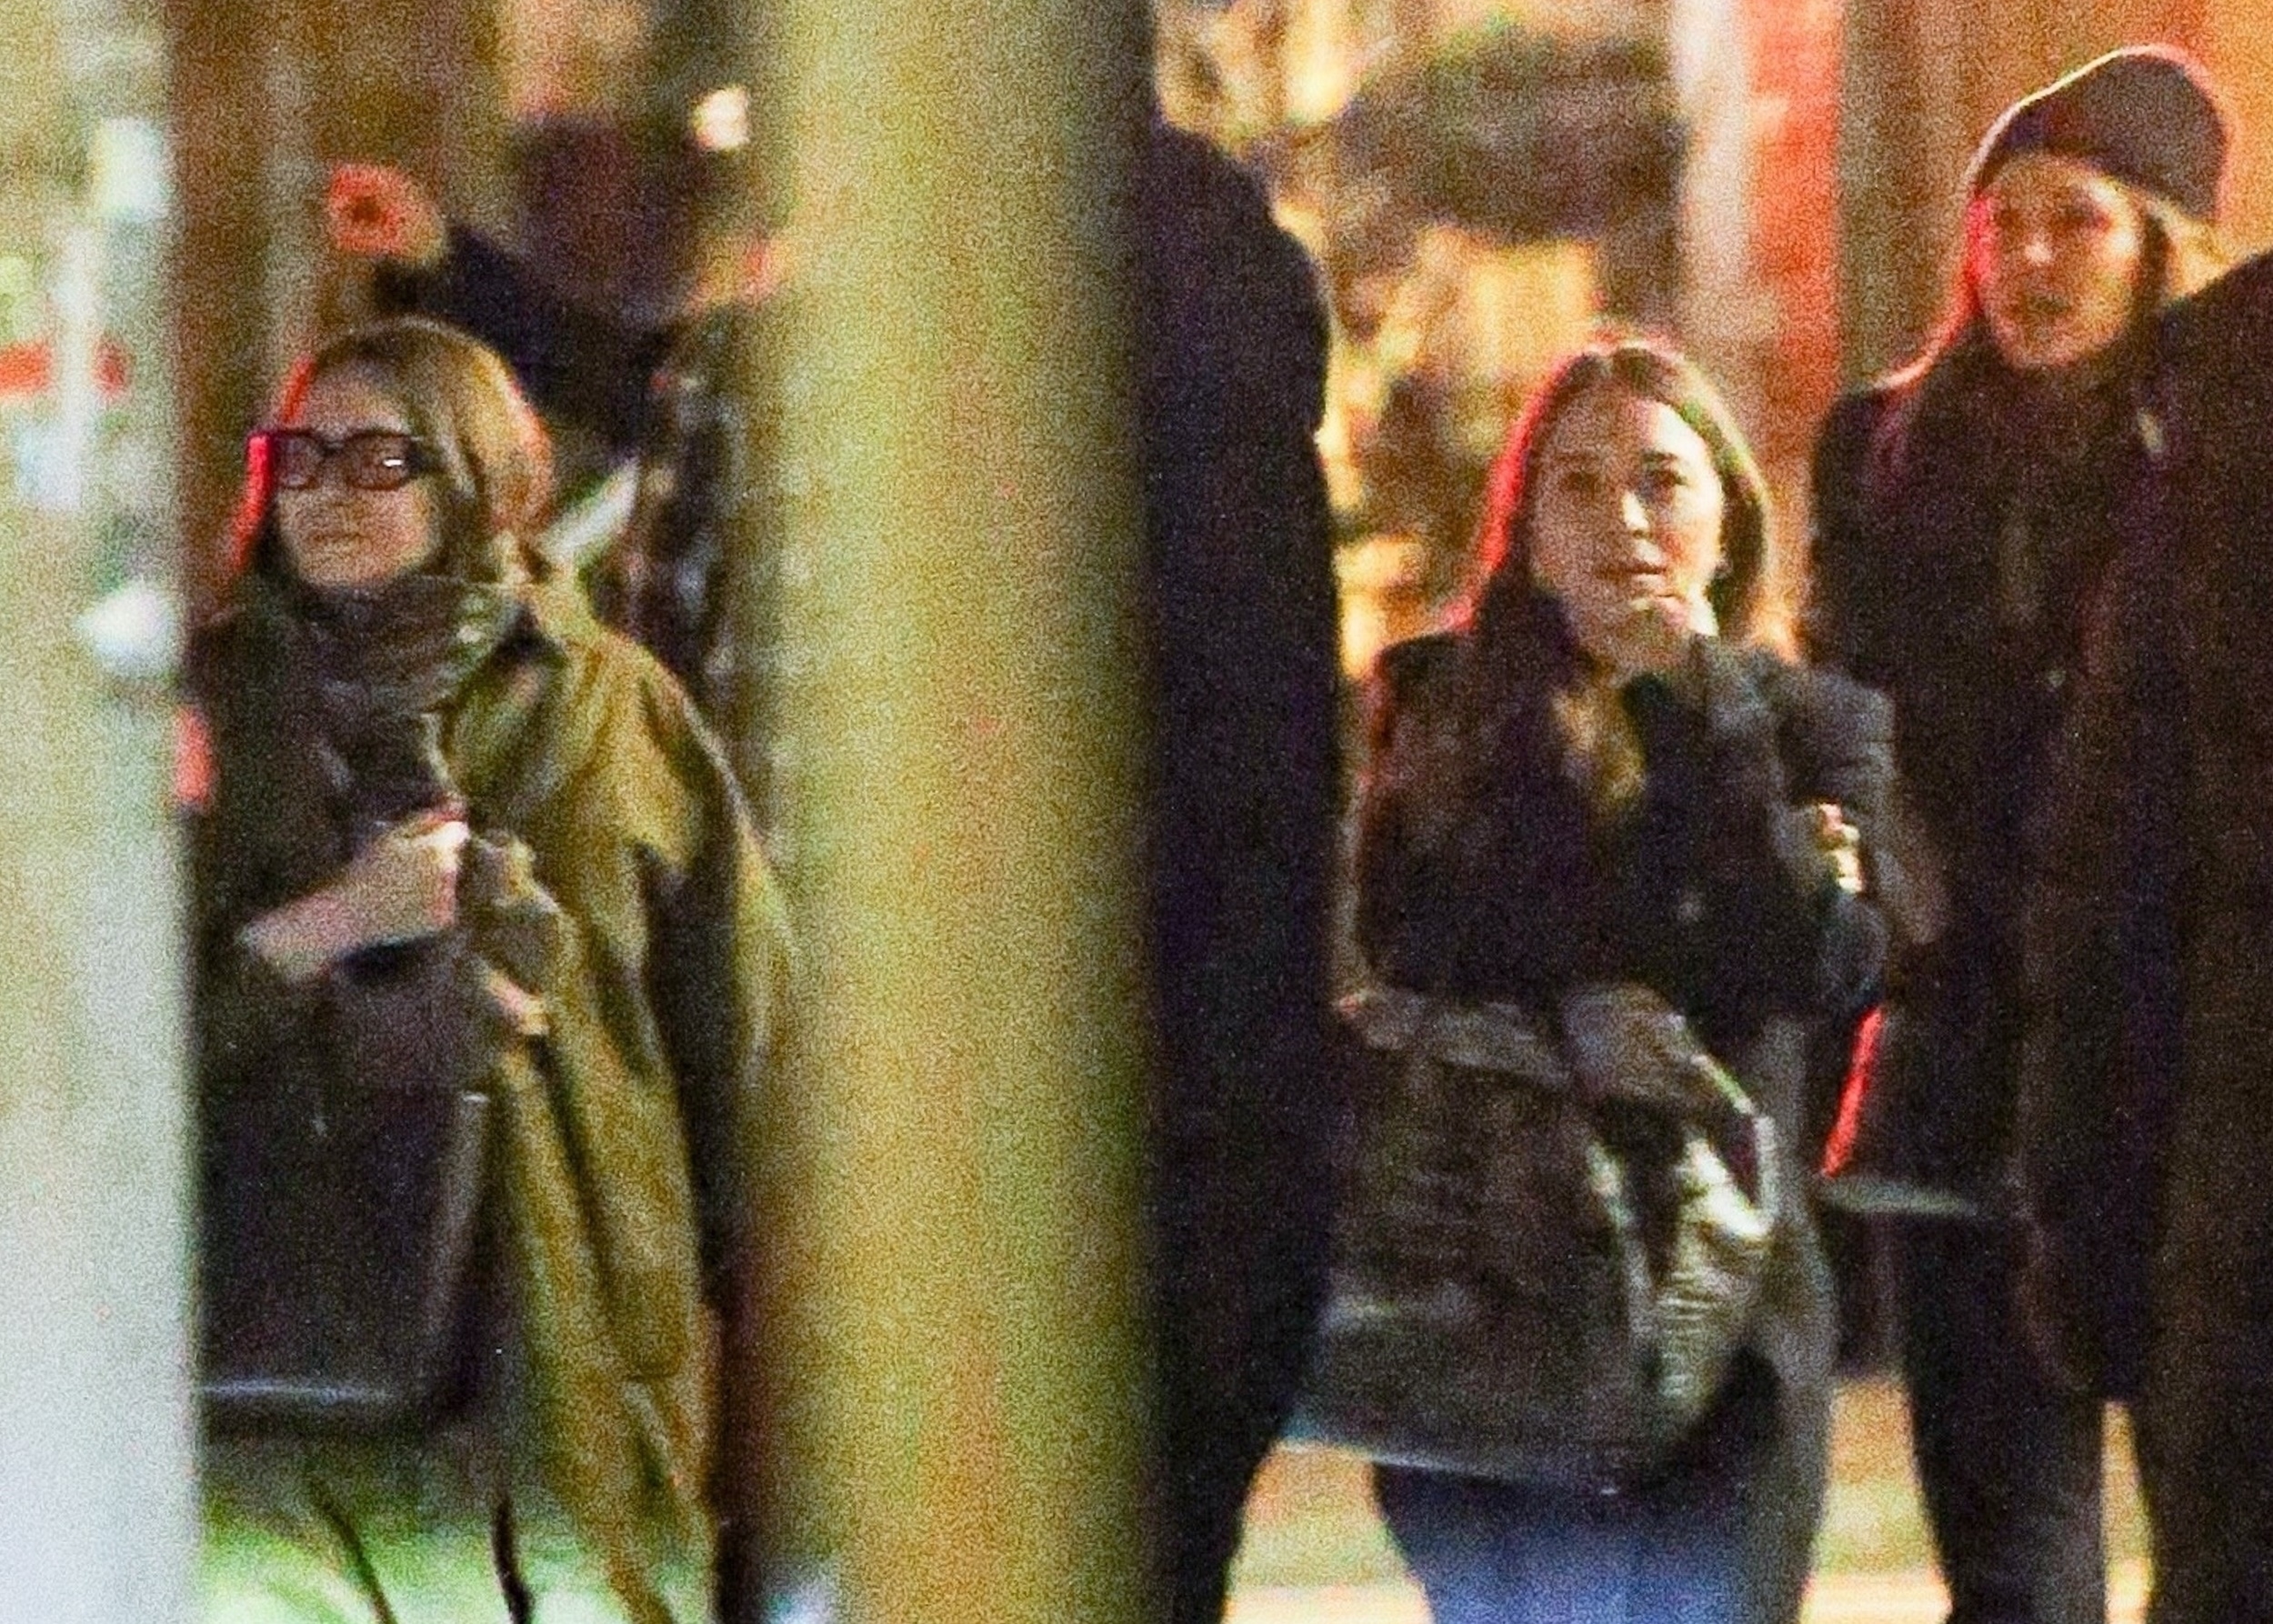 The sisters were seen bundled in warm clothing while walking the streets of New York City for a night out